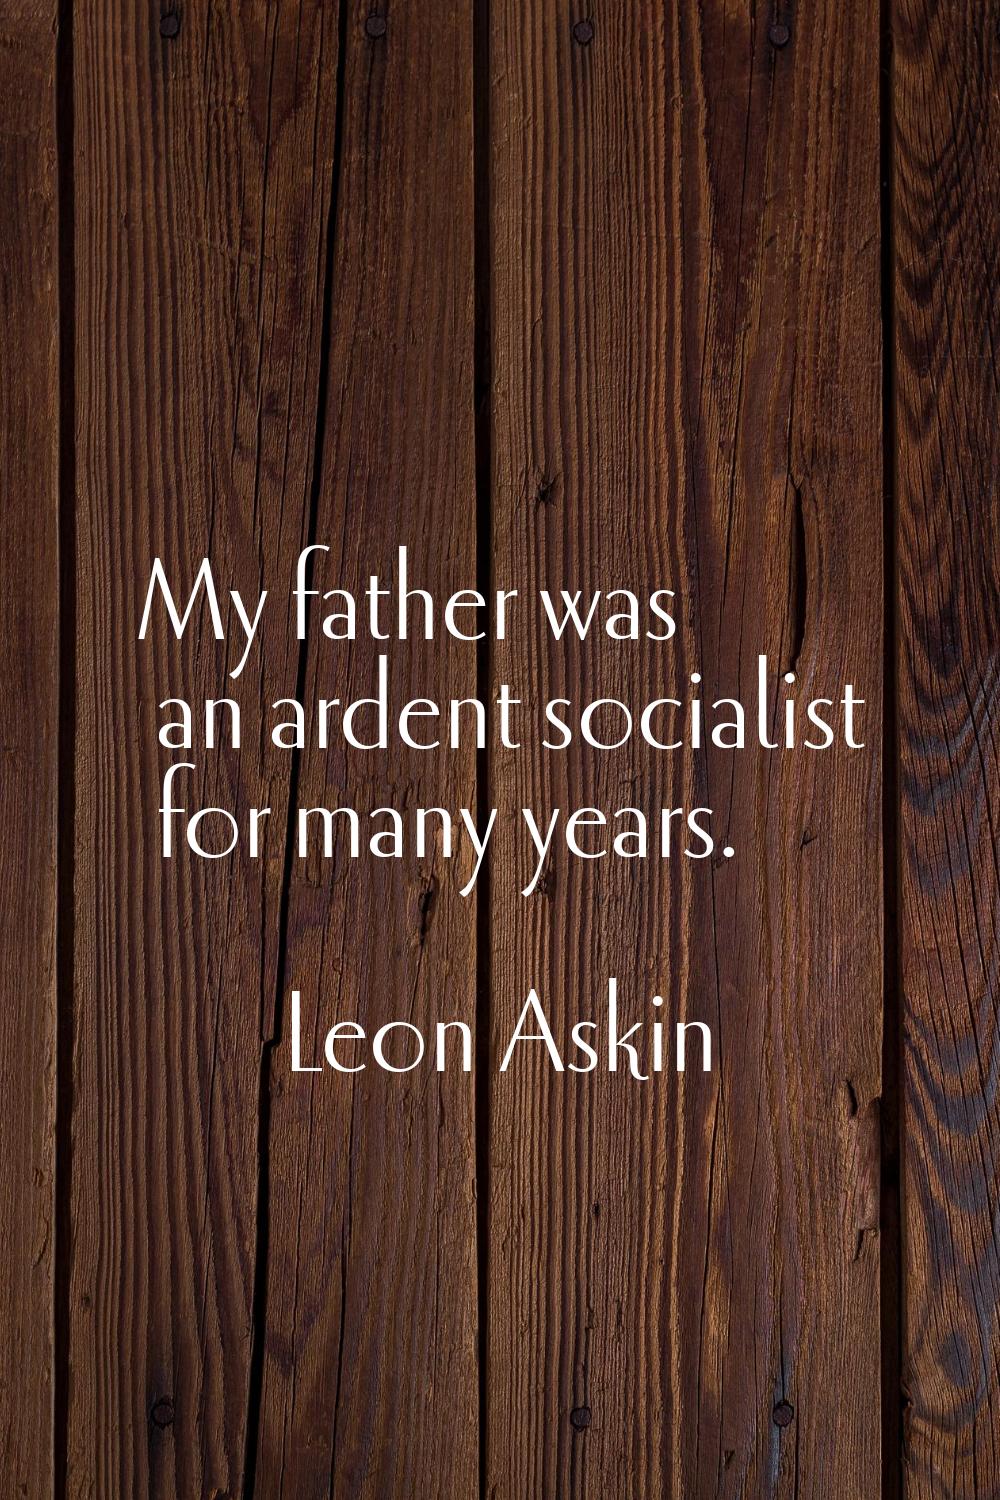 My father was an ardent socialist for many years.